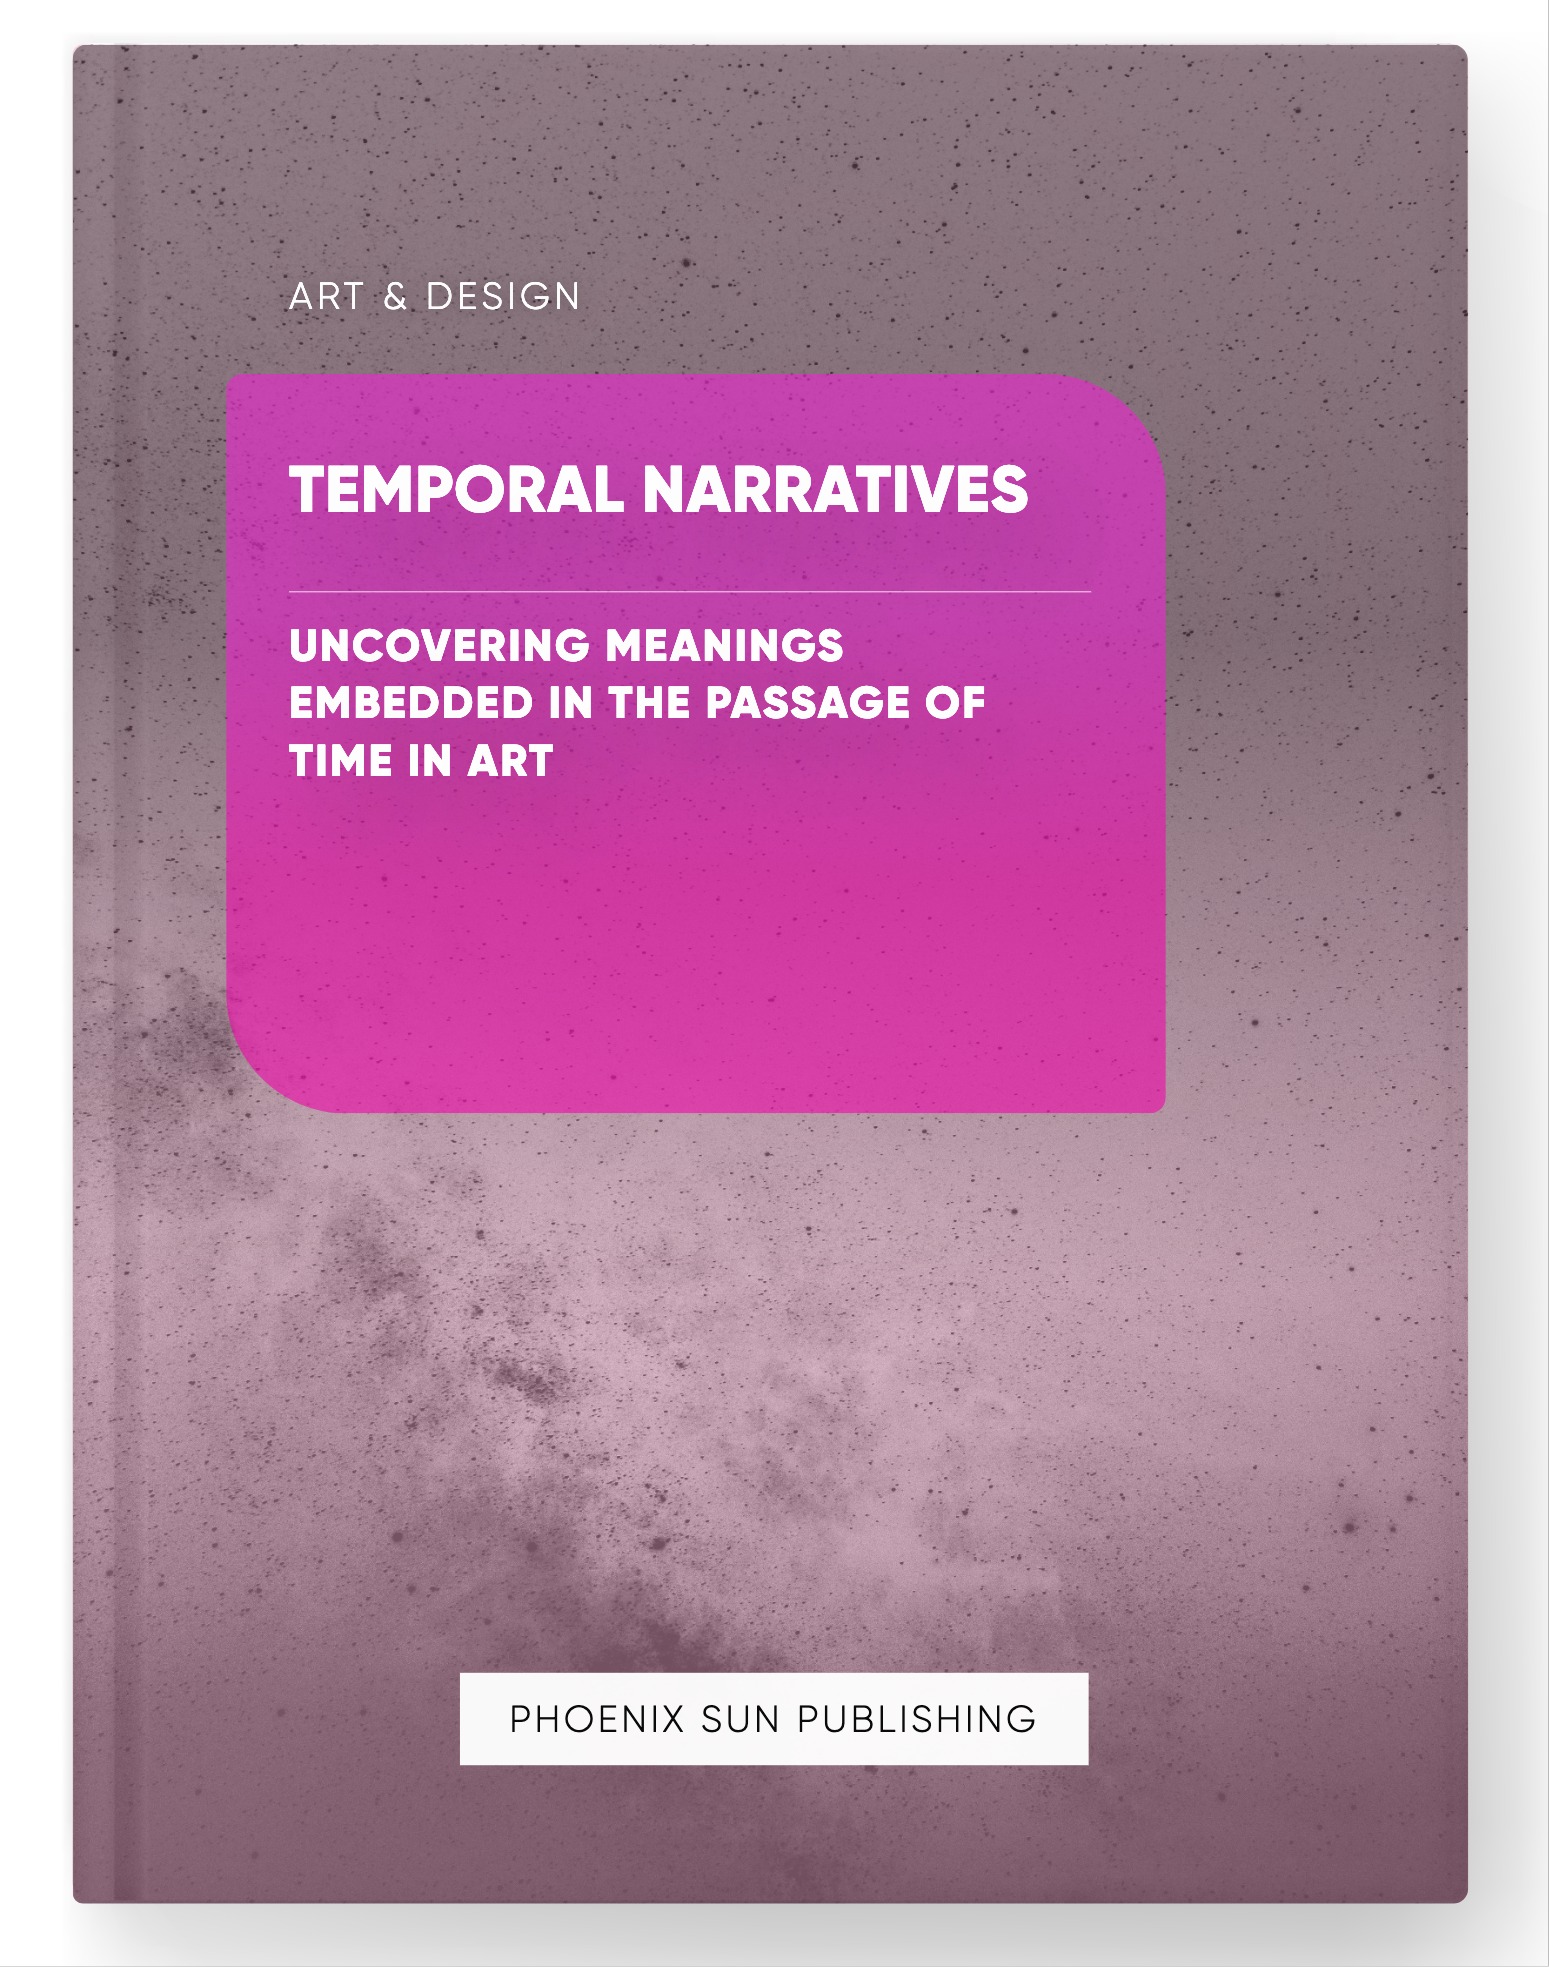 Temporal Narratives – Uncovering Meanings Embedded in the Passage of Time in Art